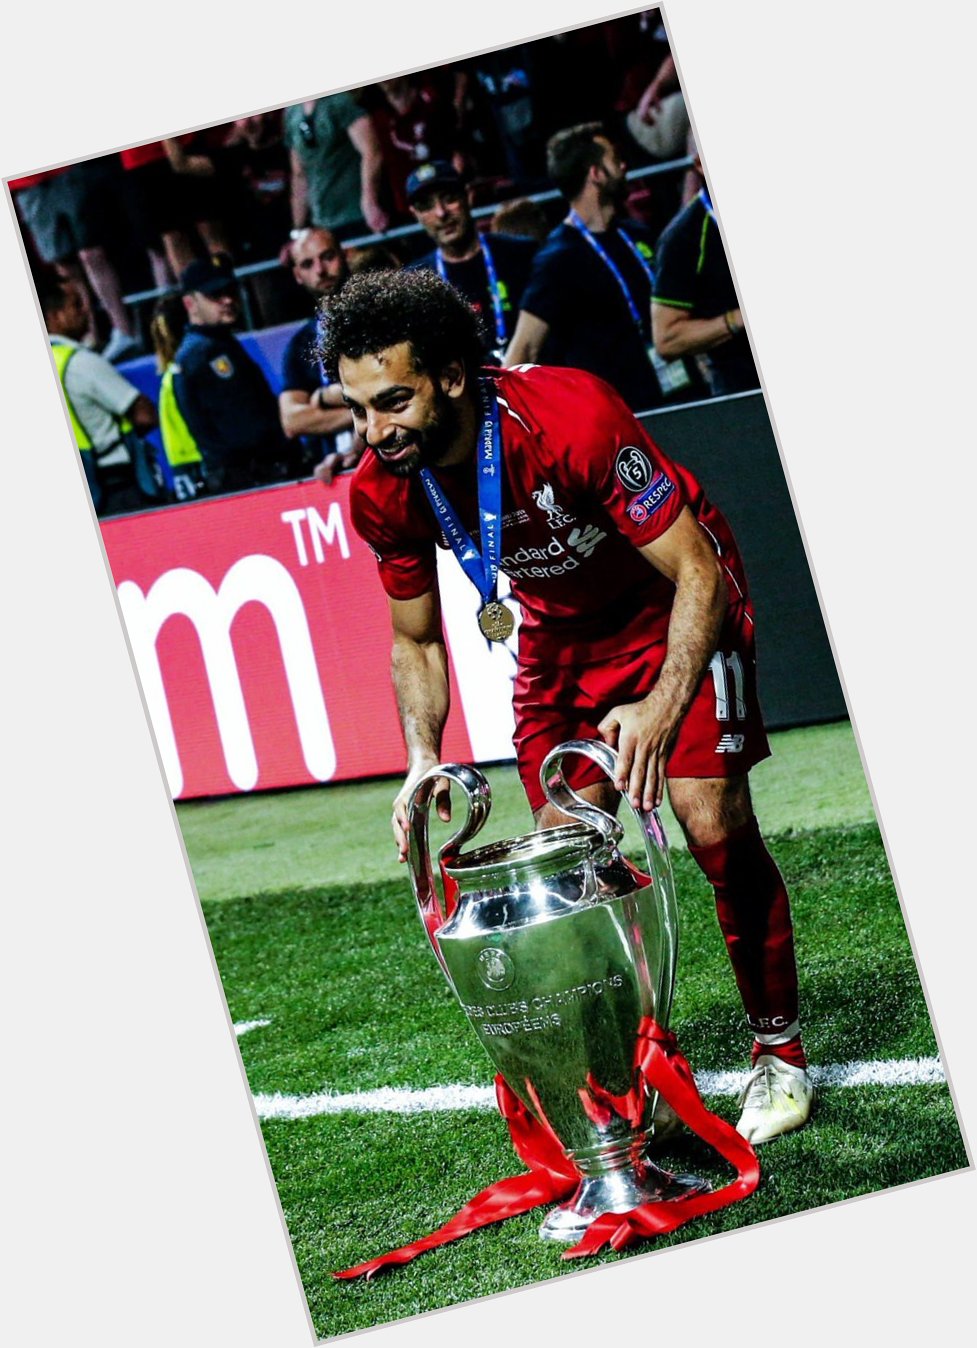 Happy 27th birthday to Mohamed Salah! 
What a player he has been for us so far in his Liverpool career.   